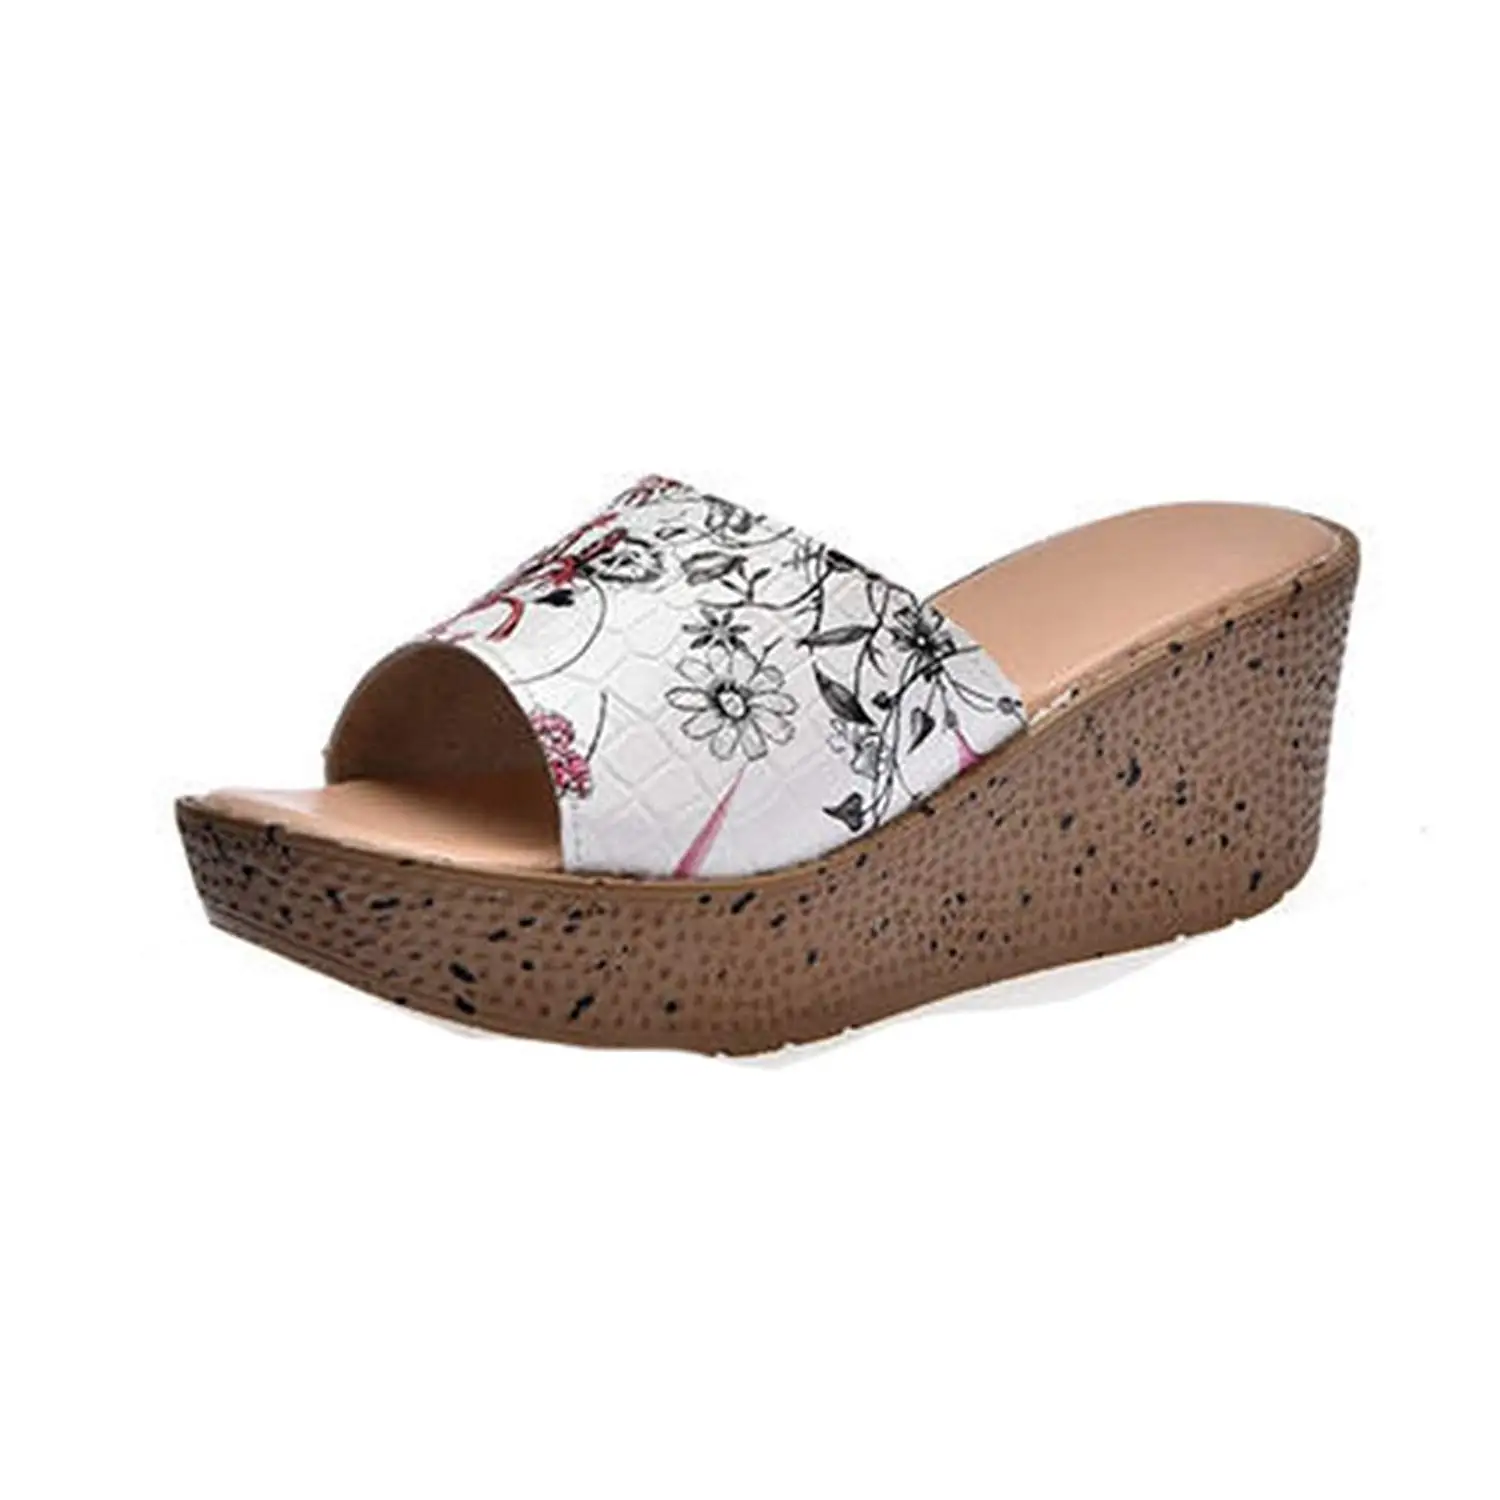 floral wedges closed toe